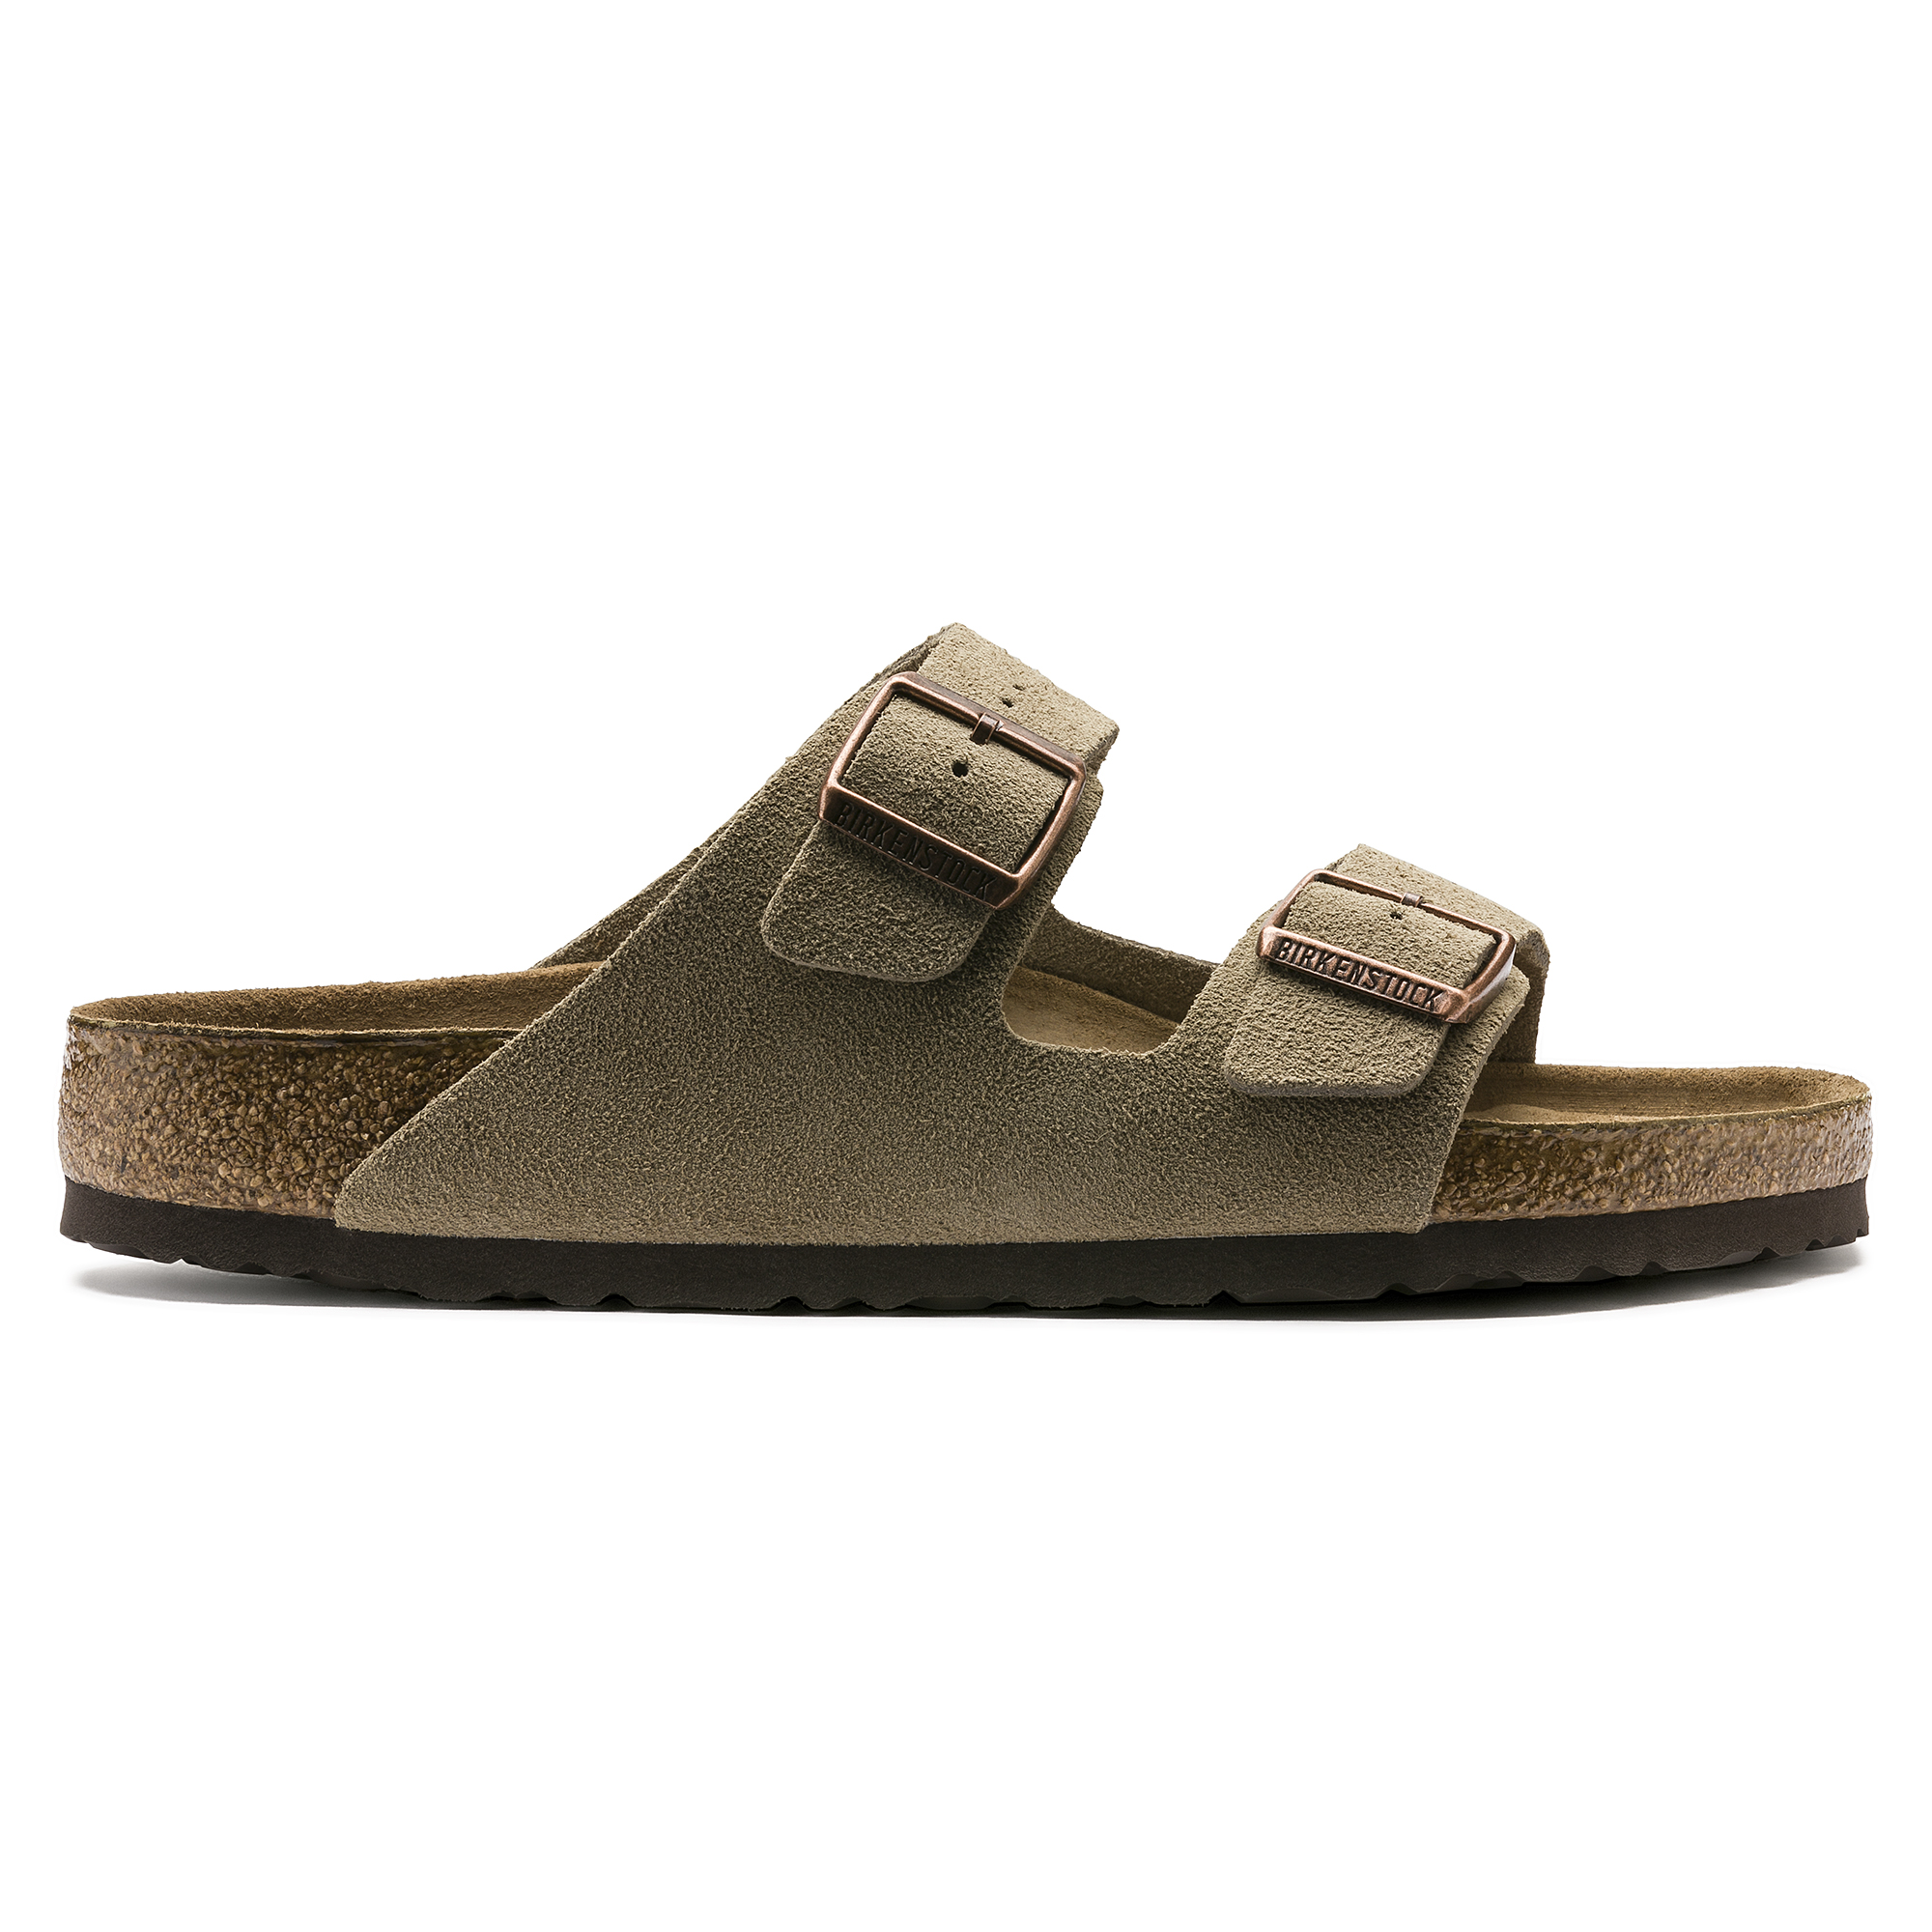 Arizona Soft BIRKENSTOCK Taupe Footbed Leather Suede 